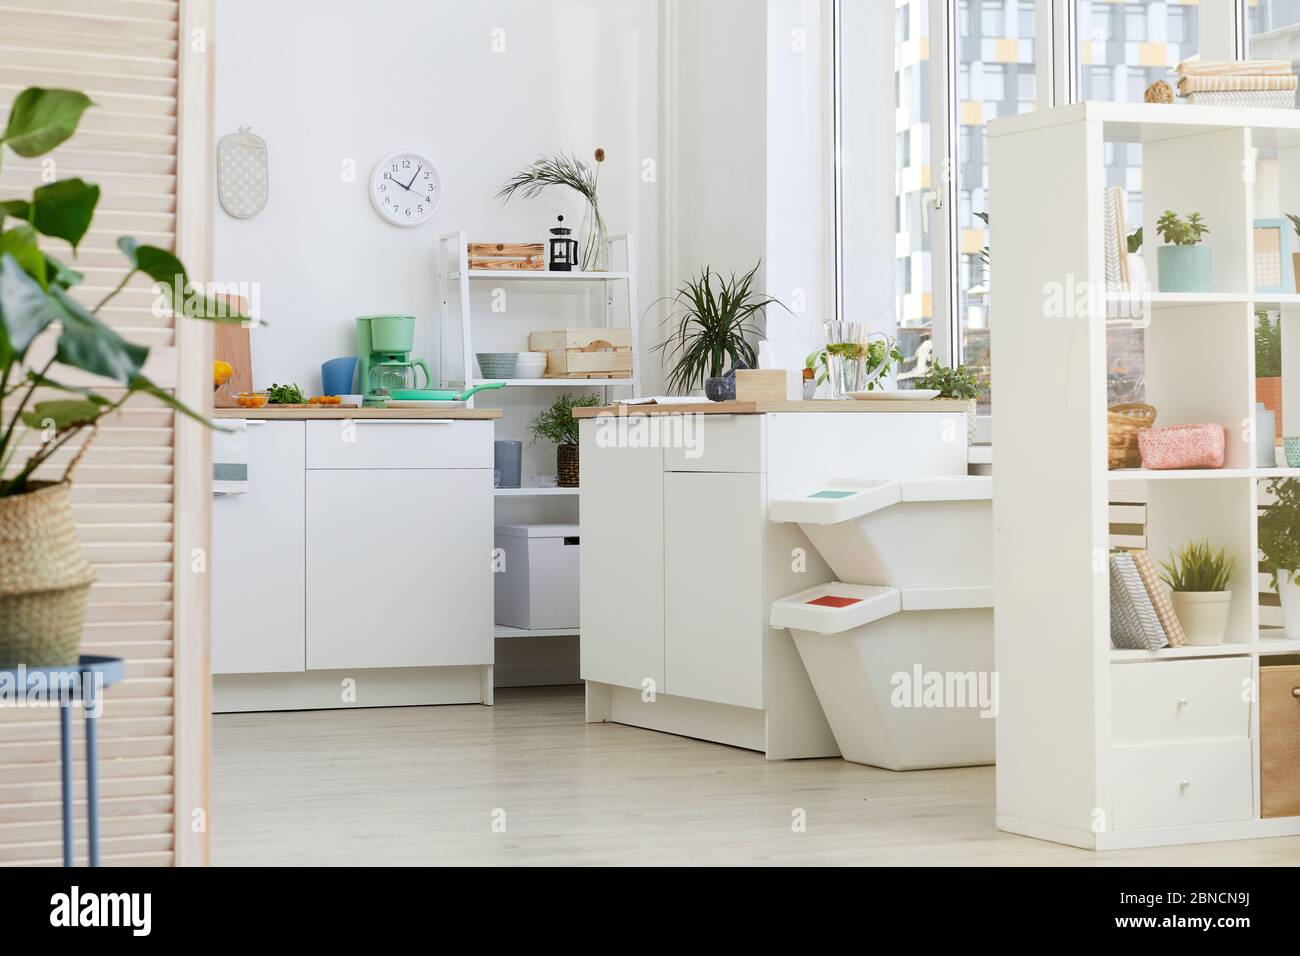 Image of cosy domestic kitchen with white furniture Stock Photo